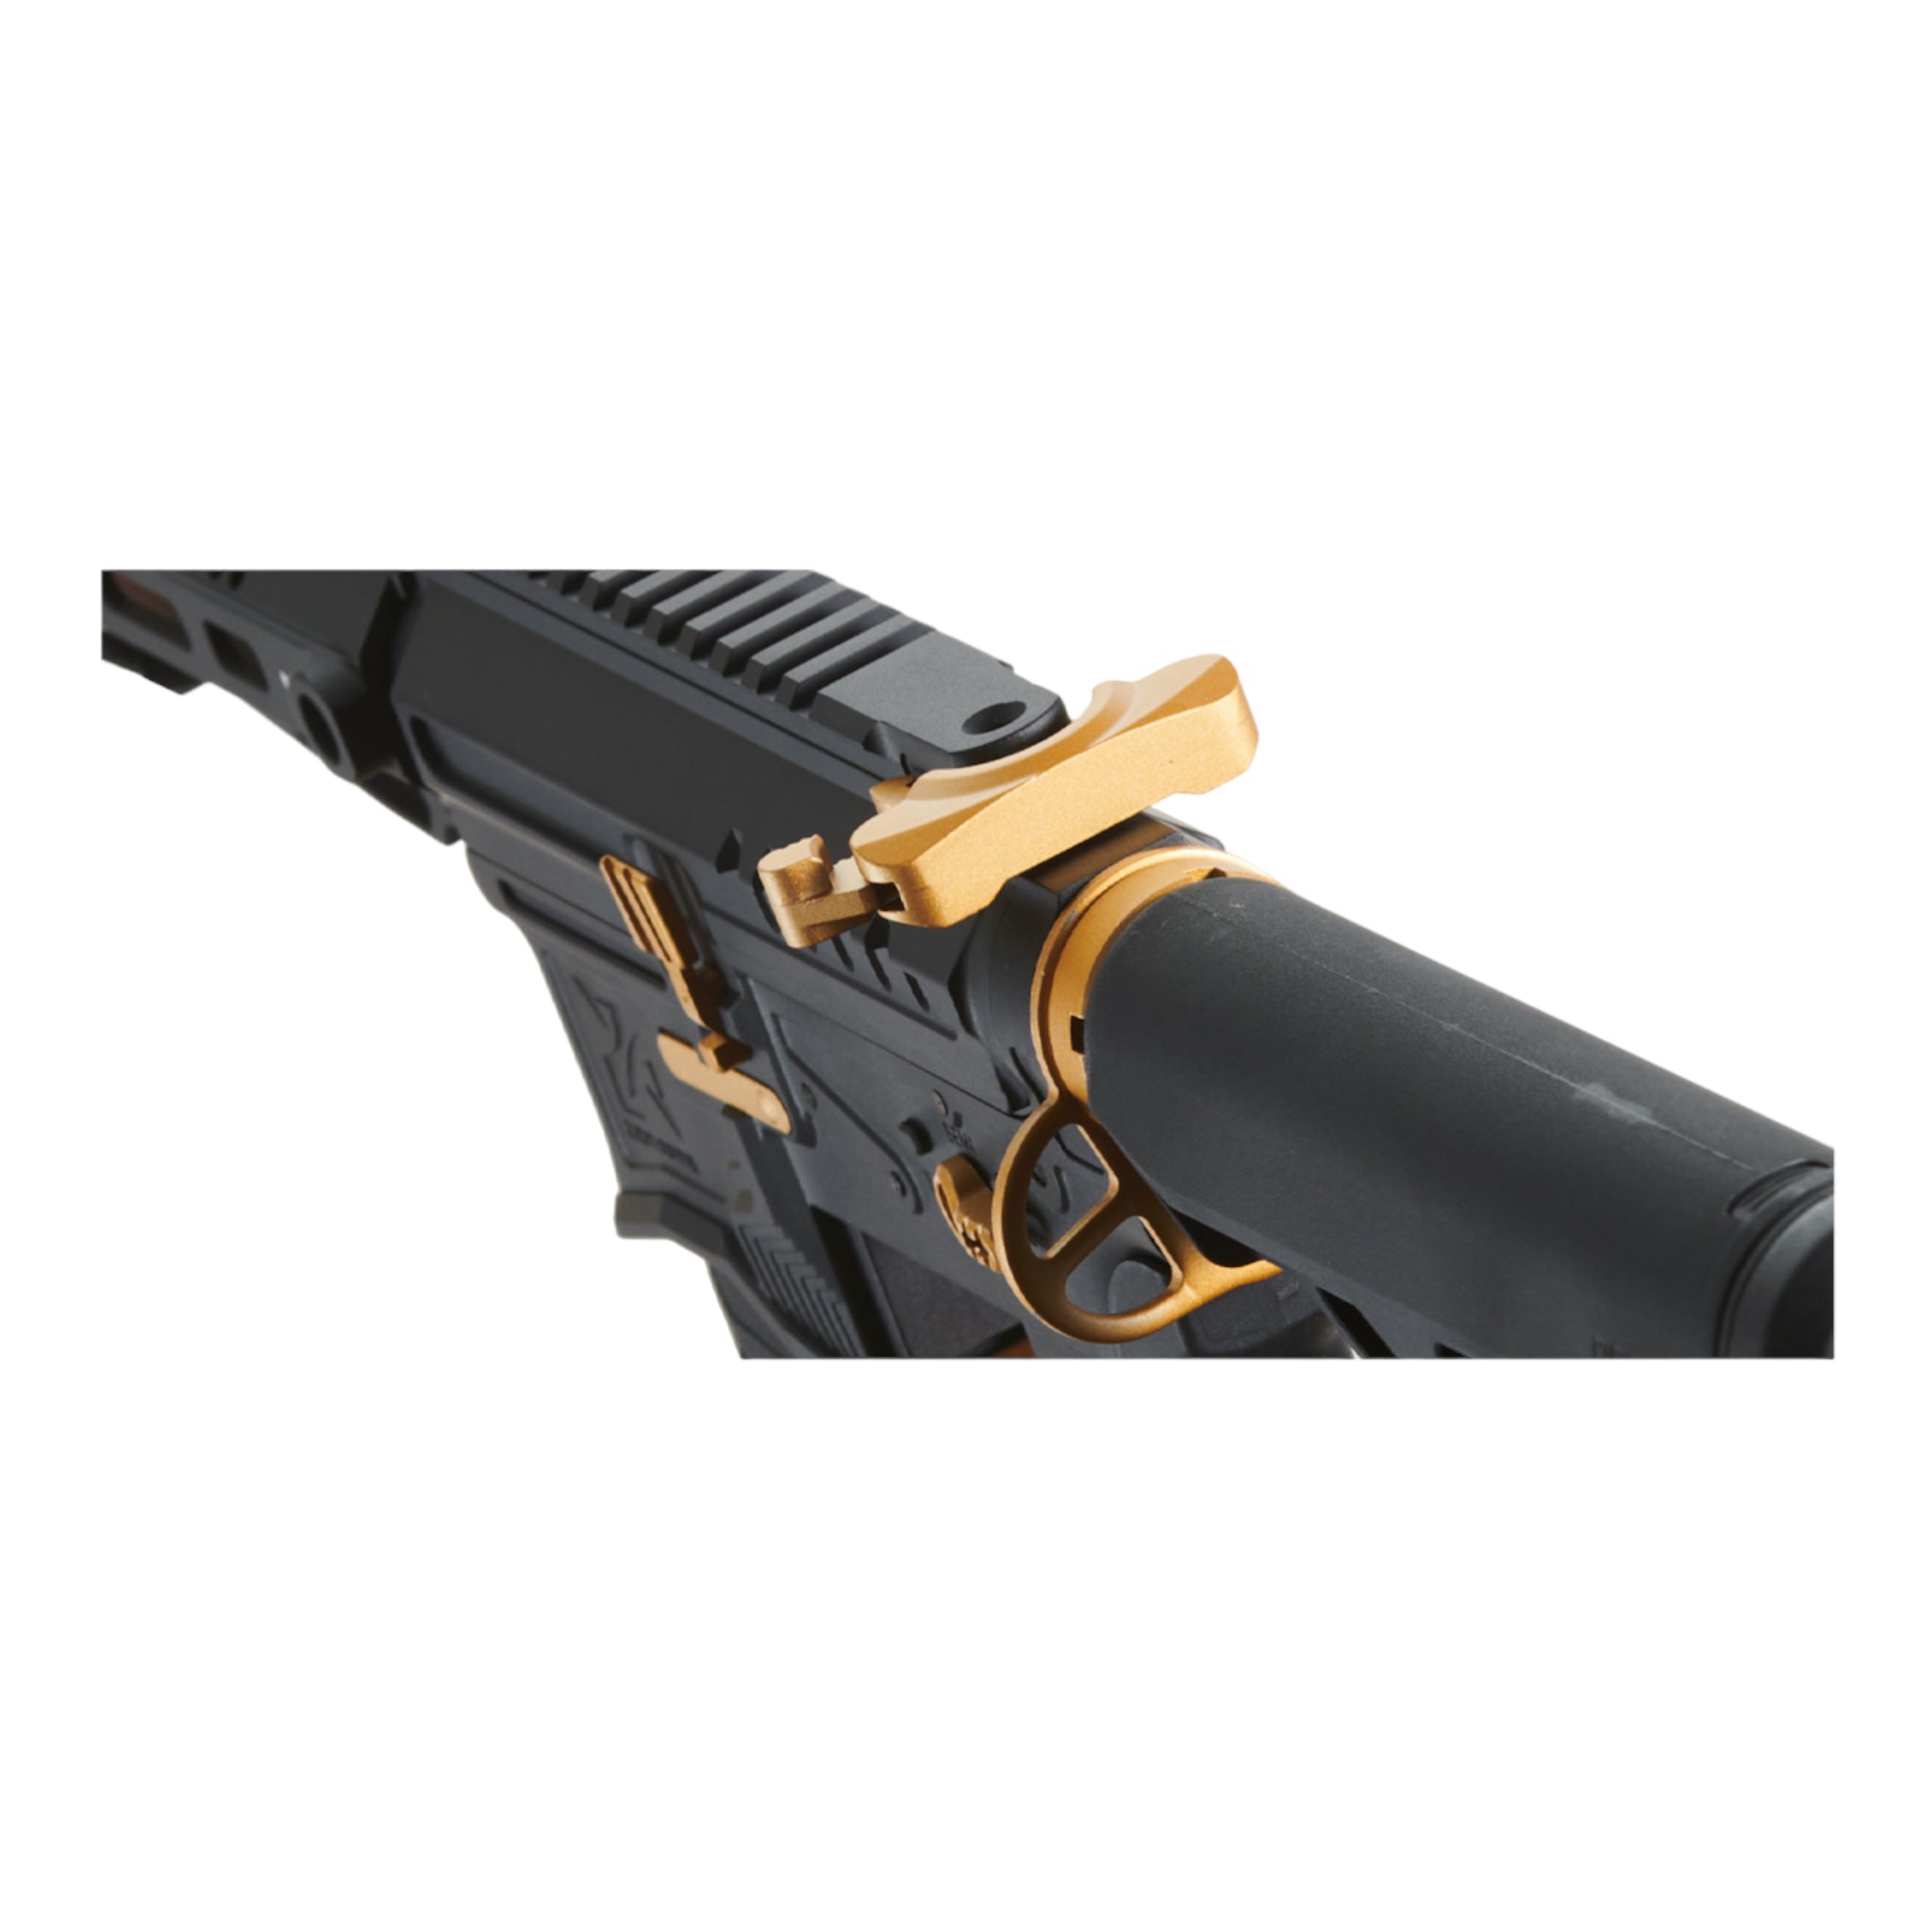 Zion Arms R15 Mod 1 Short Barrel Airsoft Rifle with Delta Stock (Black & Gold) - ssairsoft